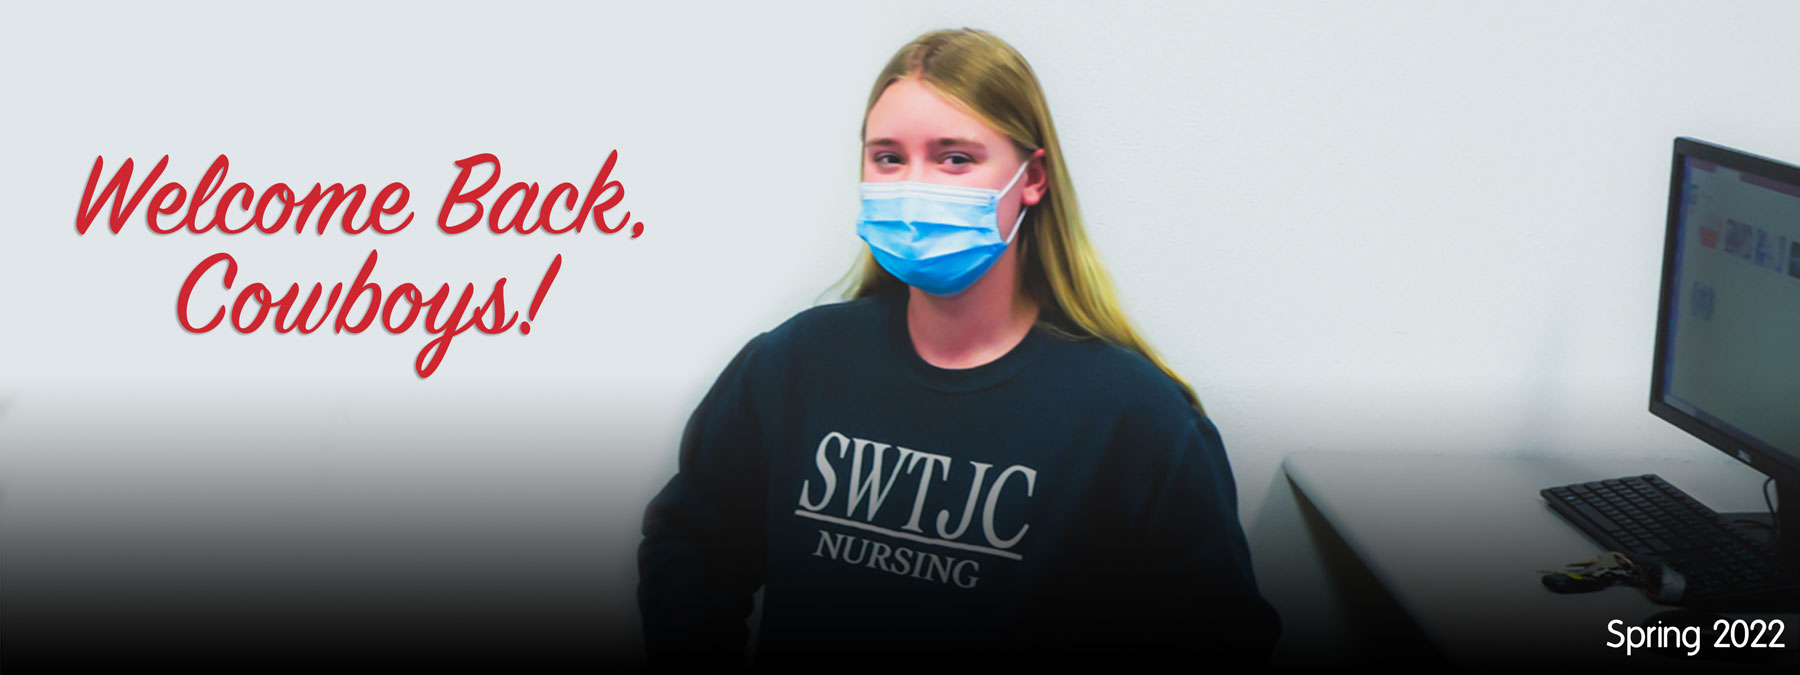 Masked female student wearing a blue SWTJC Nursing sweatshirt sitting in a classroom. Informative Text: Welcome Back, Cowboys!